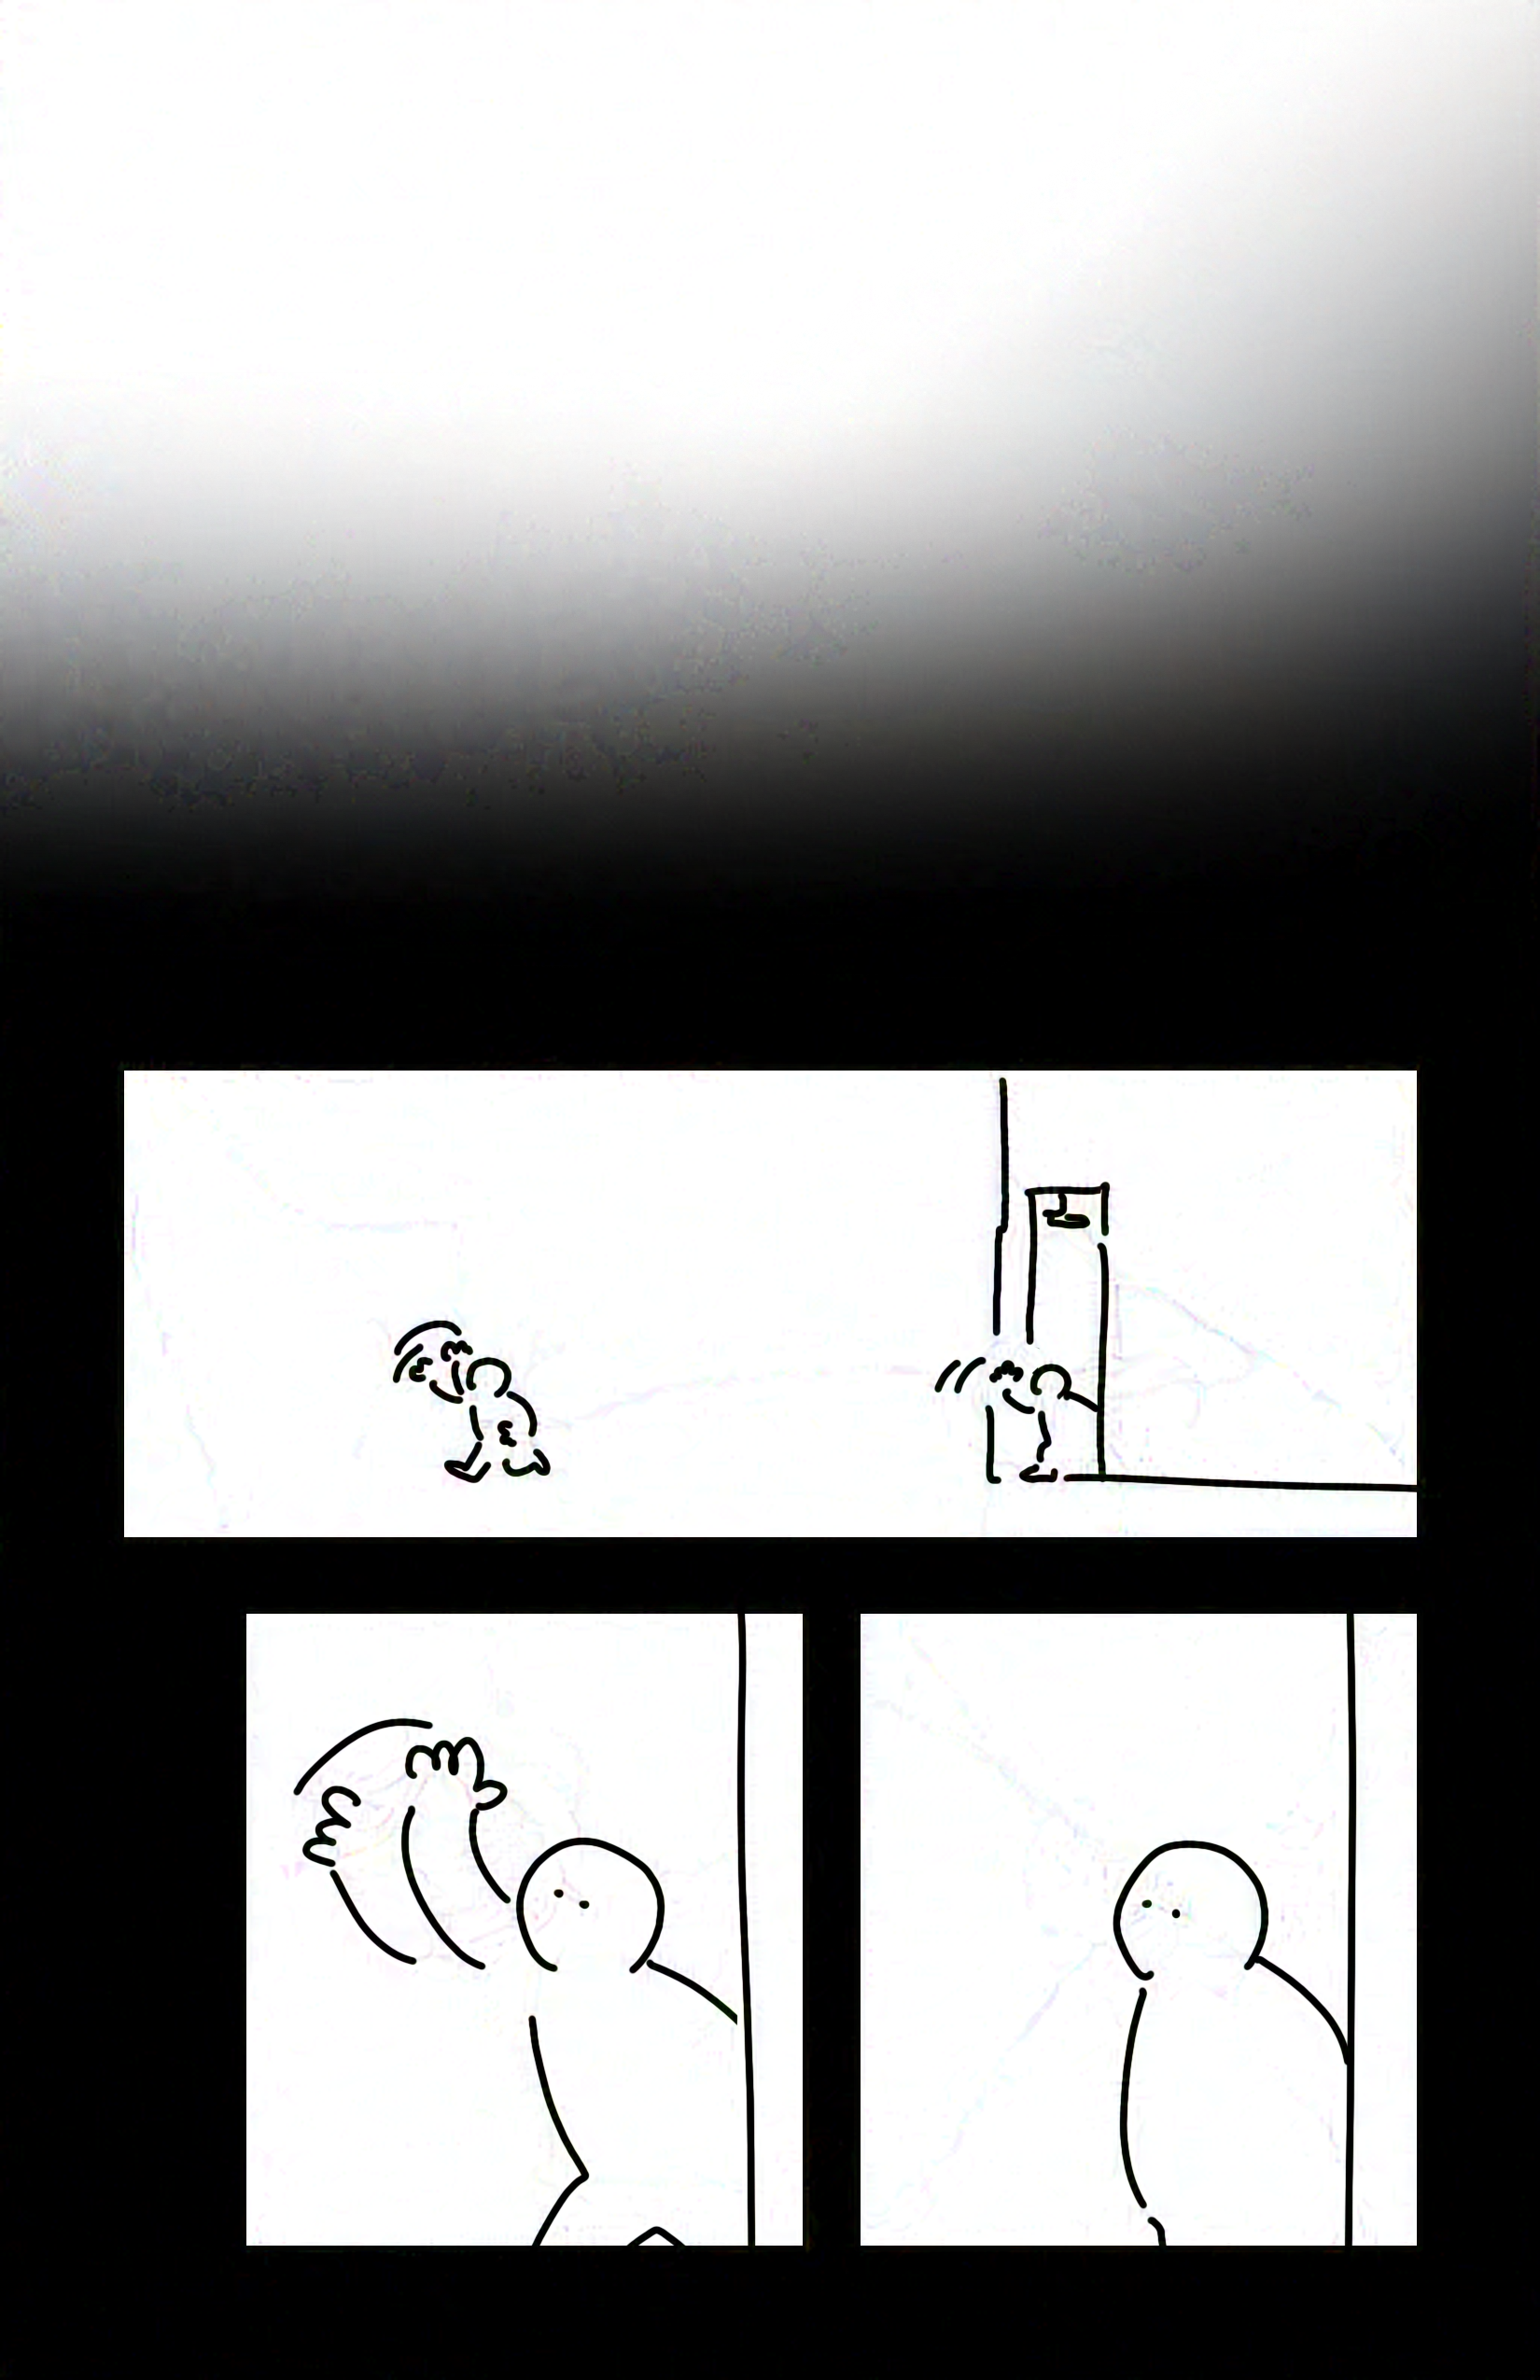 Page fades from white to black. Panel 1: Kid on the left waving as they run away from the building. Kid on the left leaning and waving back out of a door. Panel 2: Kid on the right waving. Panel 3: Kid on the right putting down their arm.